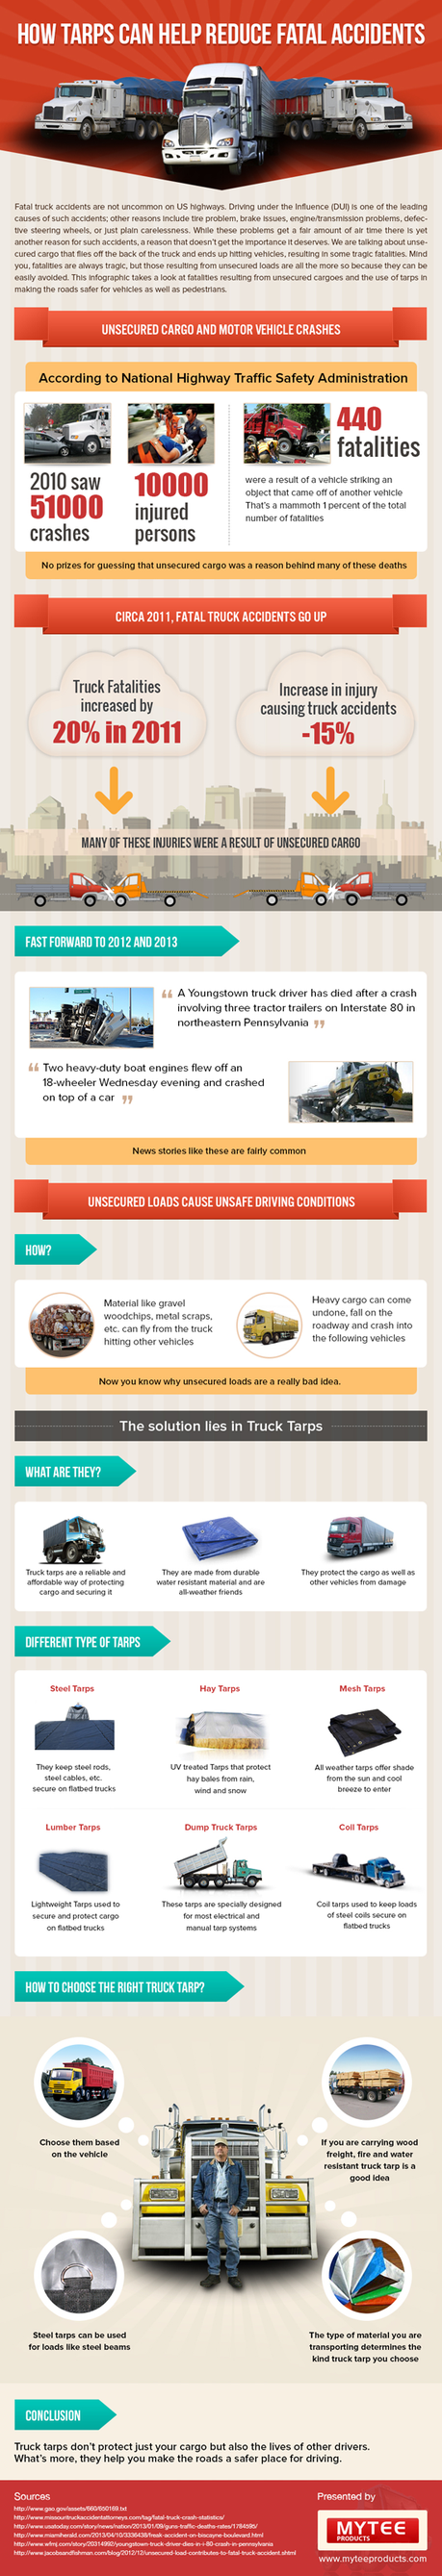 How Truck Tarps Reduce Fatal Accidents